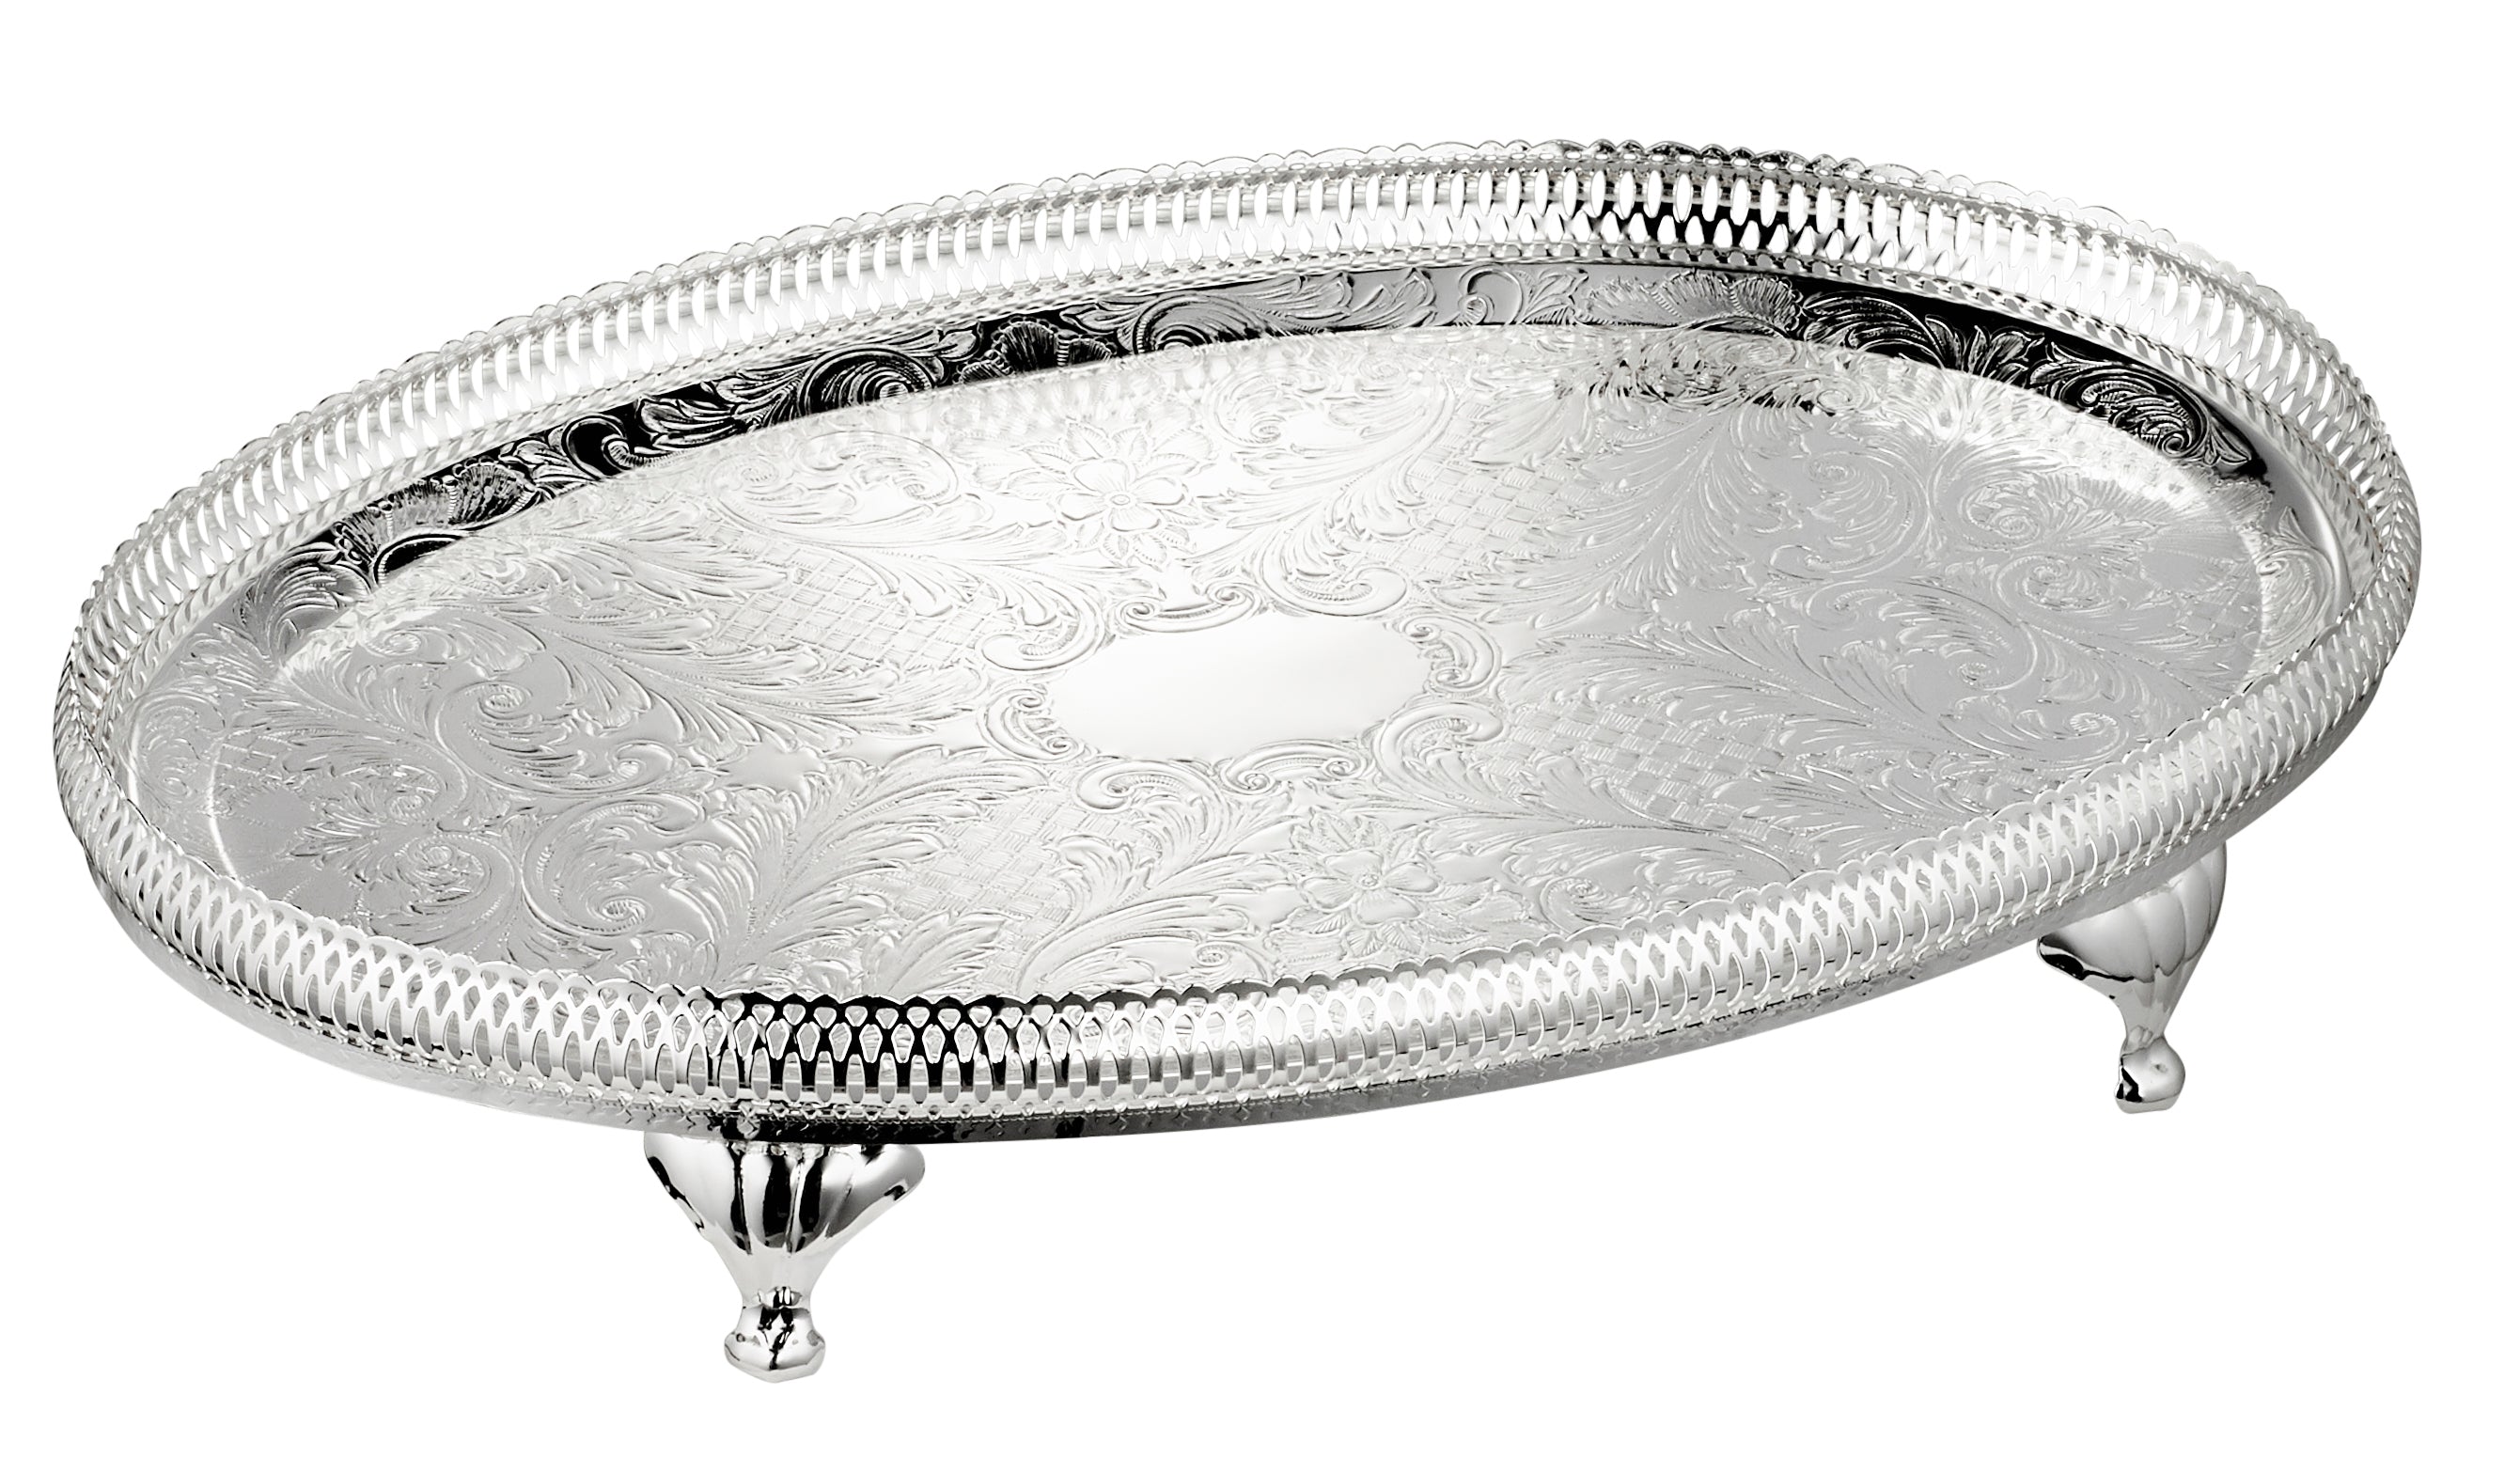 Queen Anne Gallery Tray Oval with Legs,  39cm X 26cm X 7cm High - Royal Gift